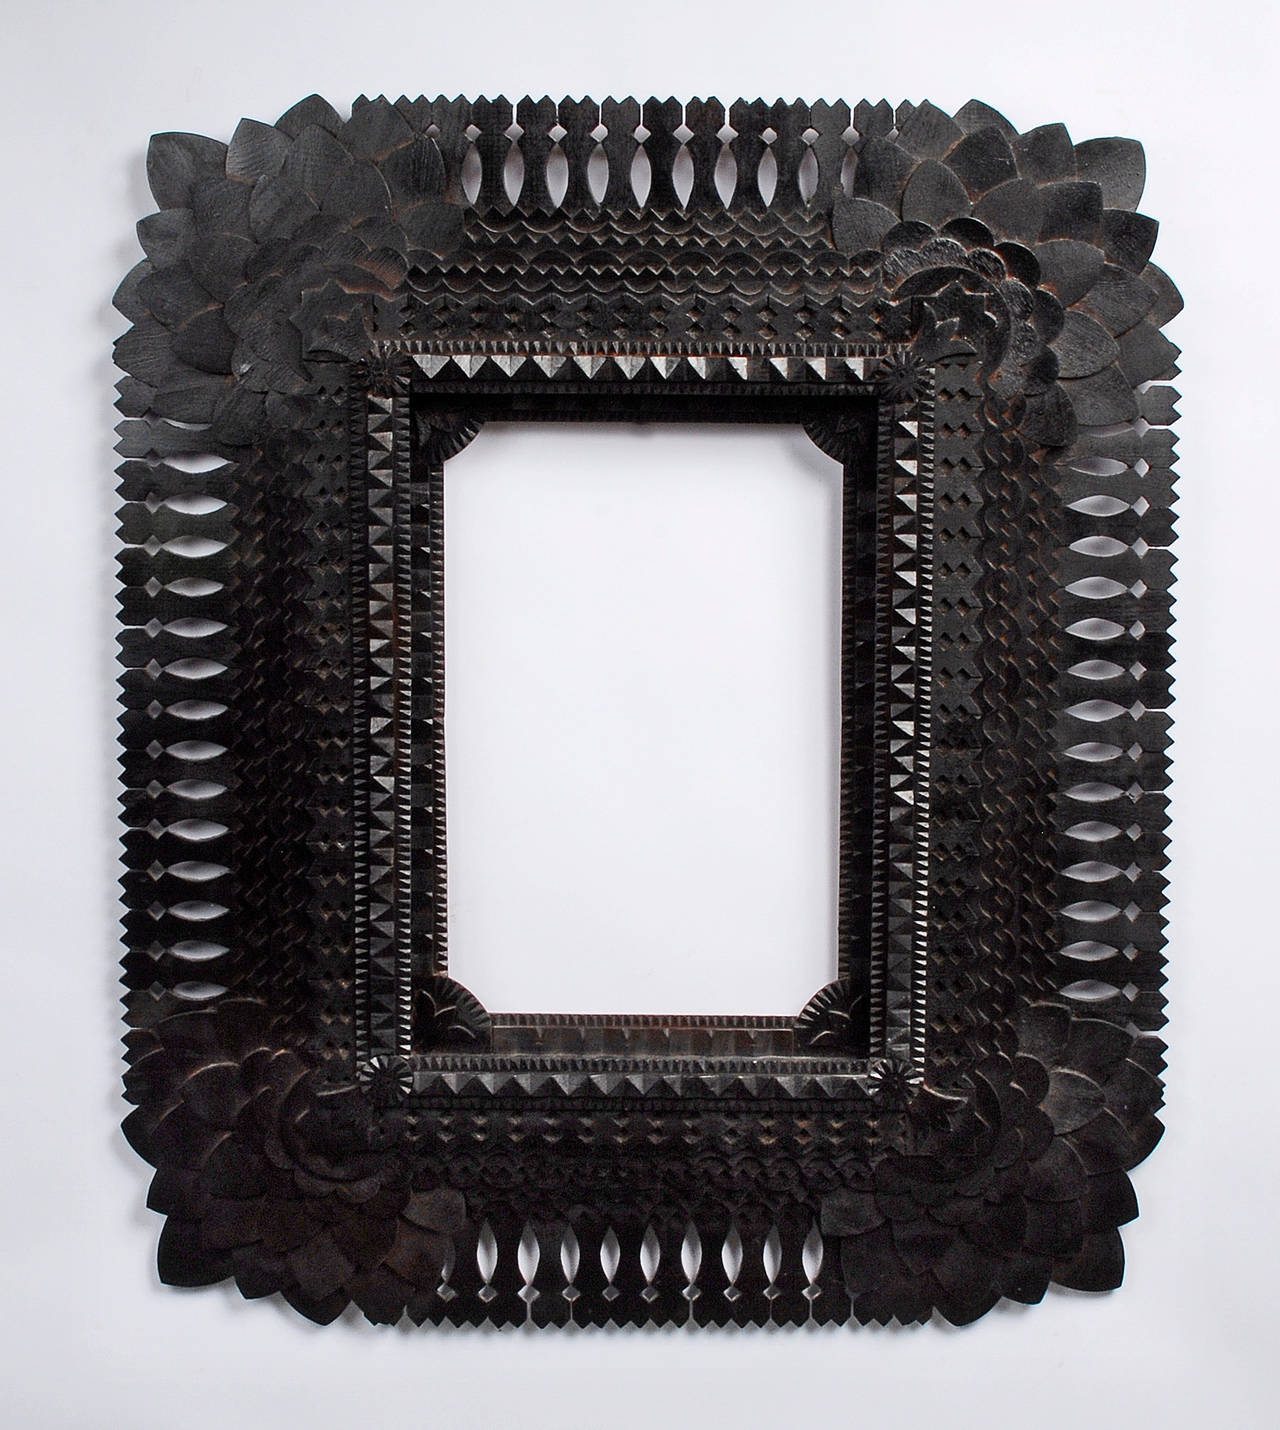 Superb sunflower cornered tramp art frame made by the important historical artist tramp artist John Zubersky (1884 – 1950). Large & robust with fine detailed work this frame exhibits all of Zubersky’s  signature elements. Big impressive sunflower